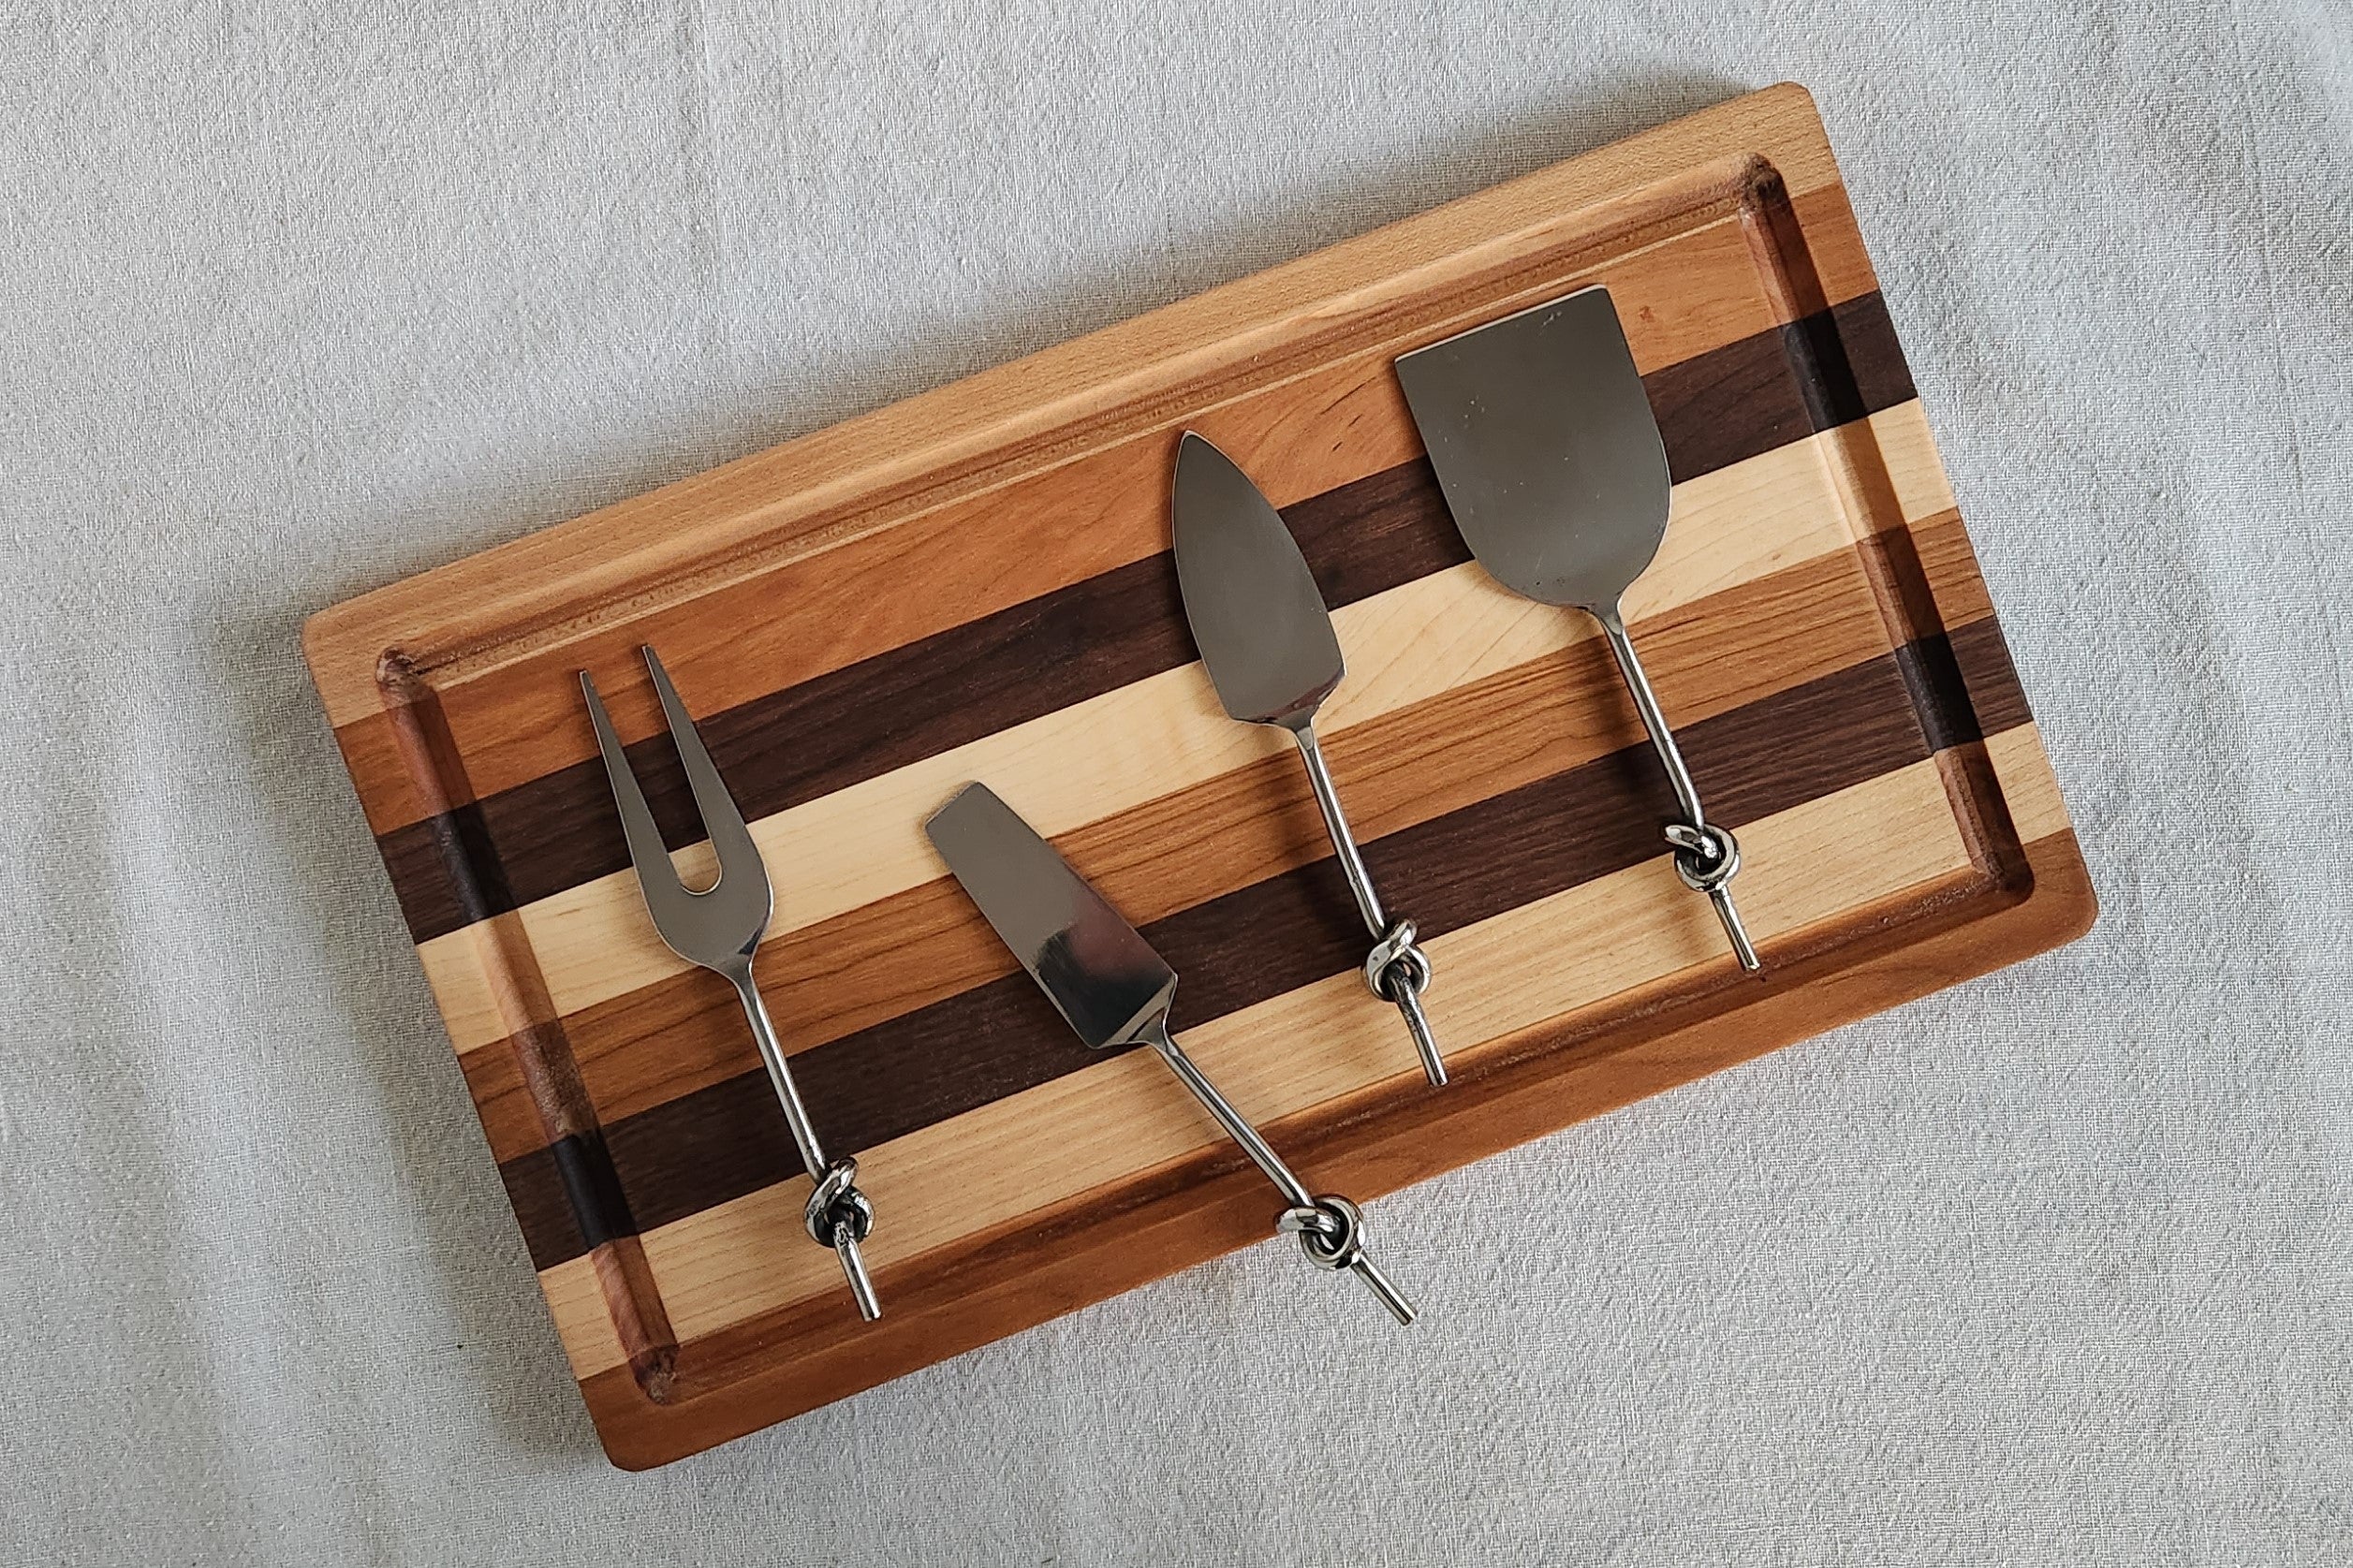 Boat Gifts - Nautical Cheese Cutting Board And Knives Set - Cool